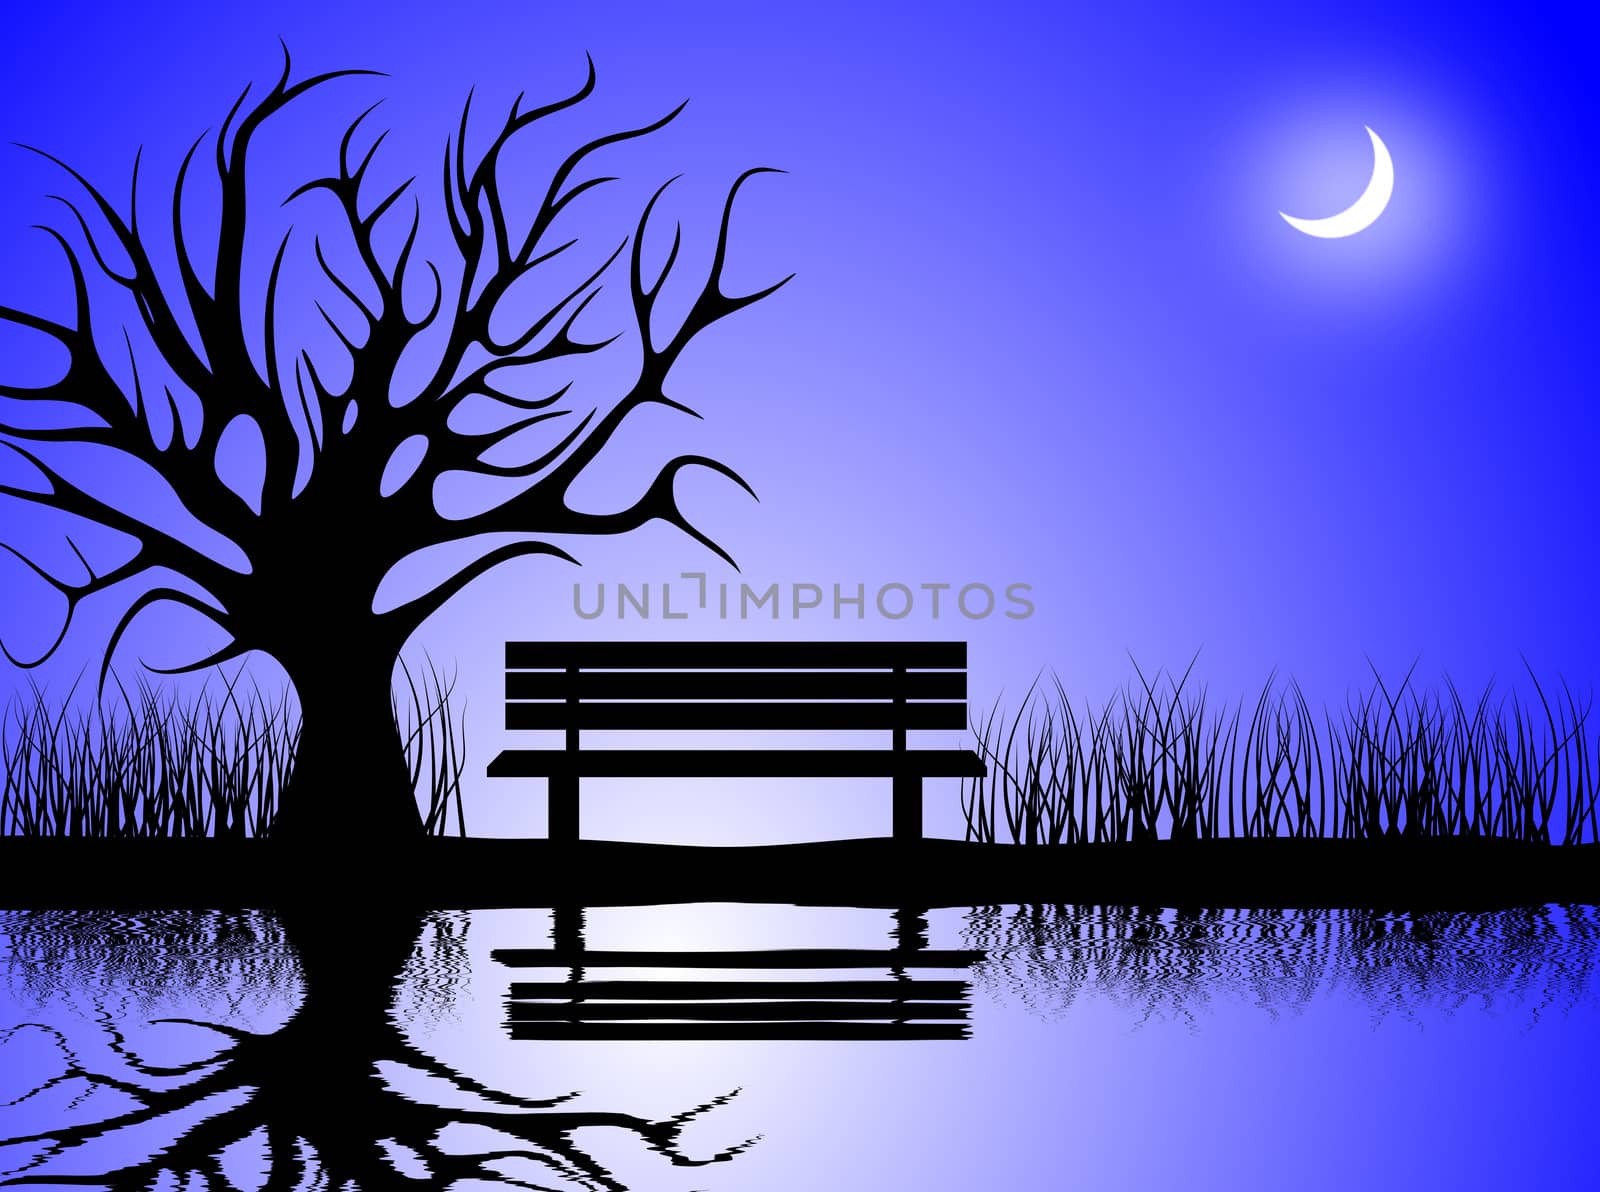 A cold winter moon lit night scene of a park with a bench and a withered tree
